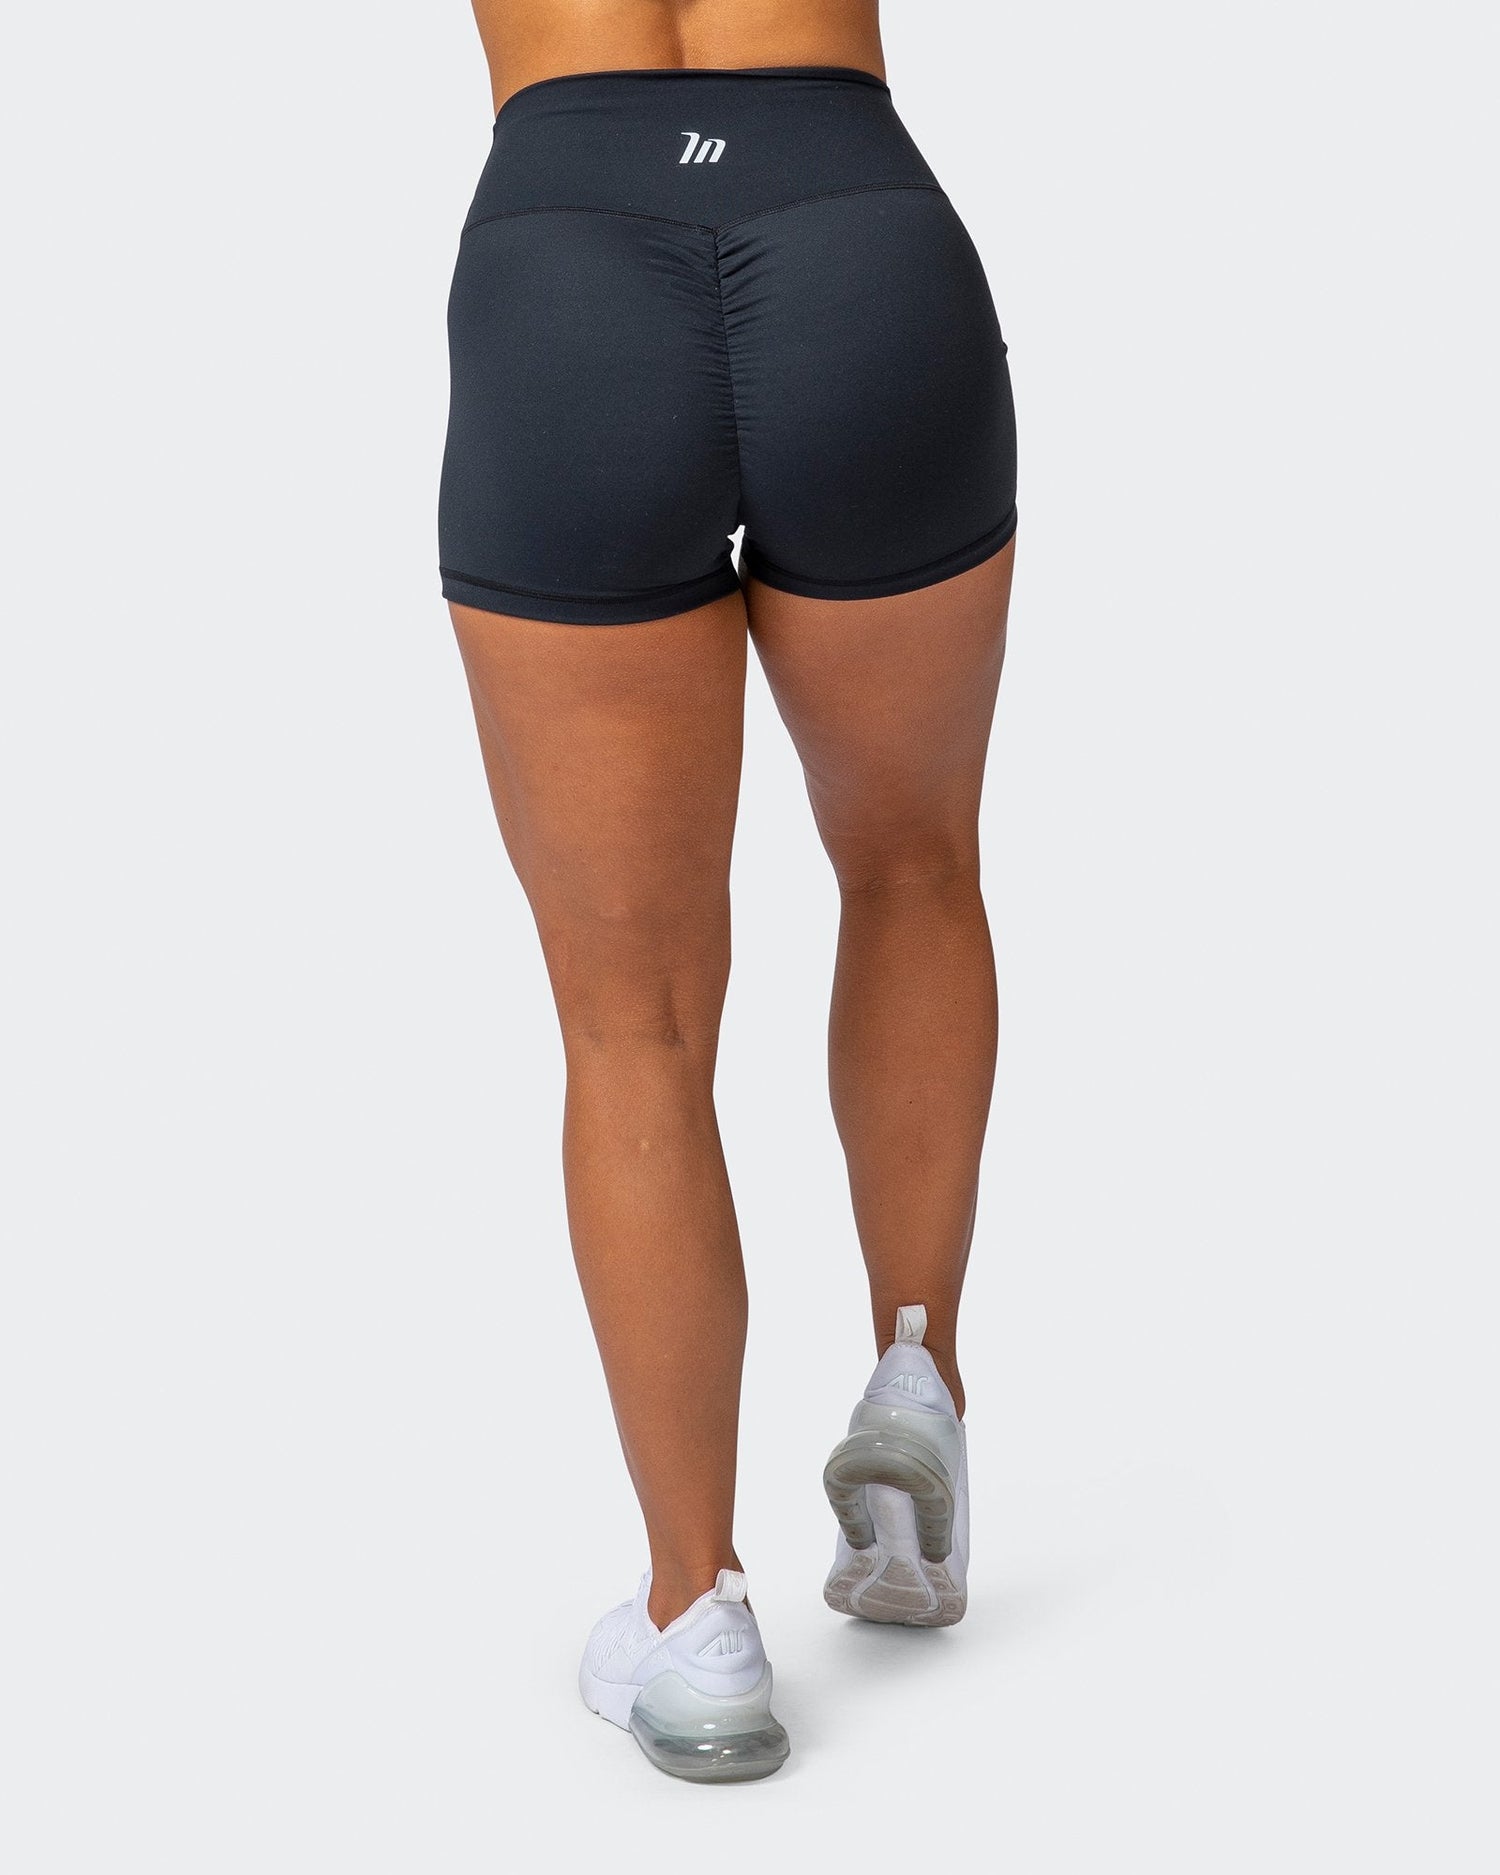 Woxer Women's Boxers Black Size L - $10 - From Catelyn